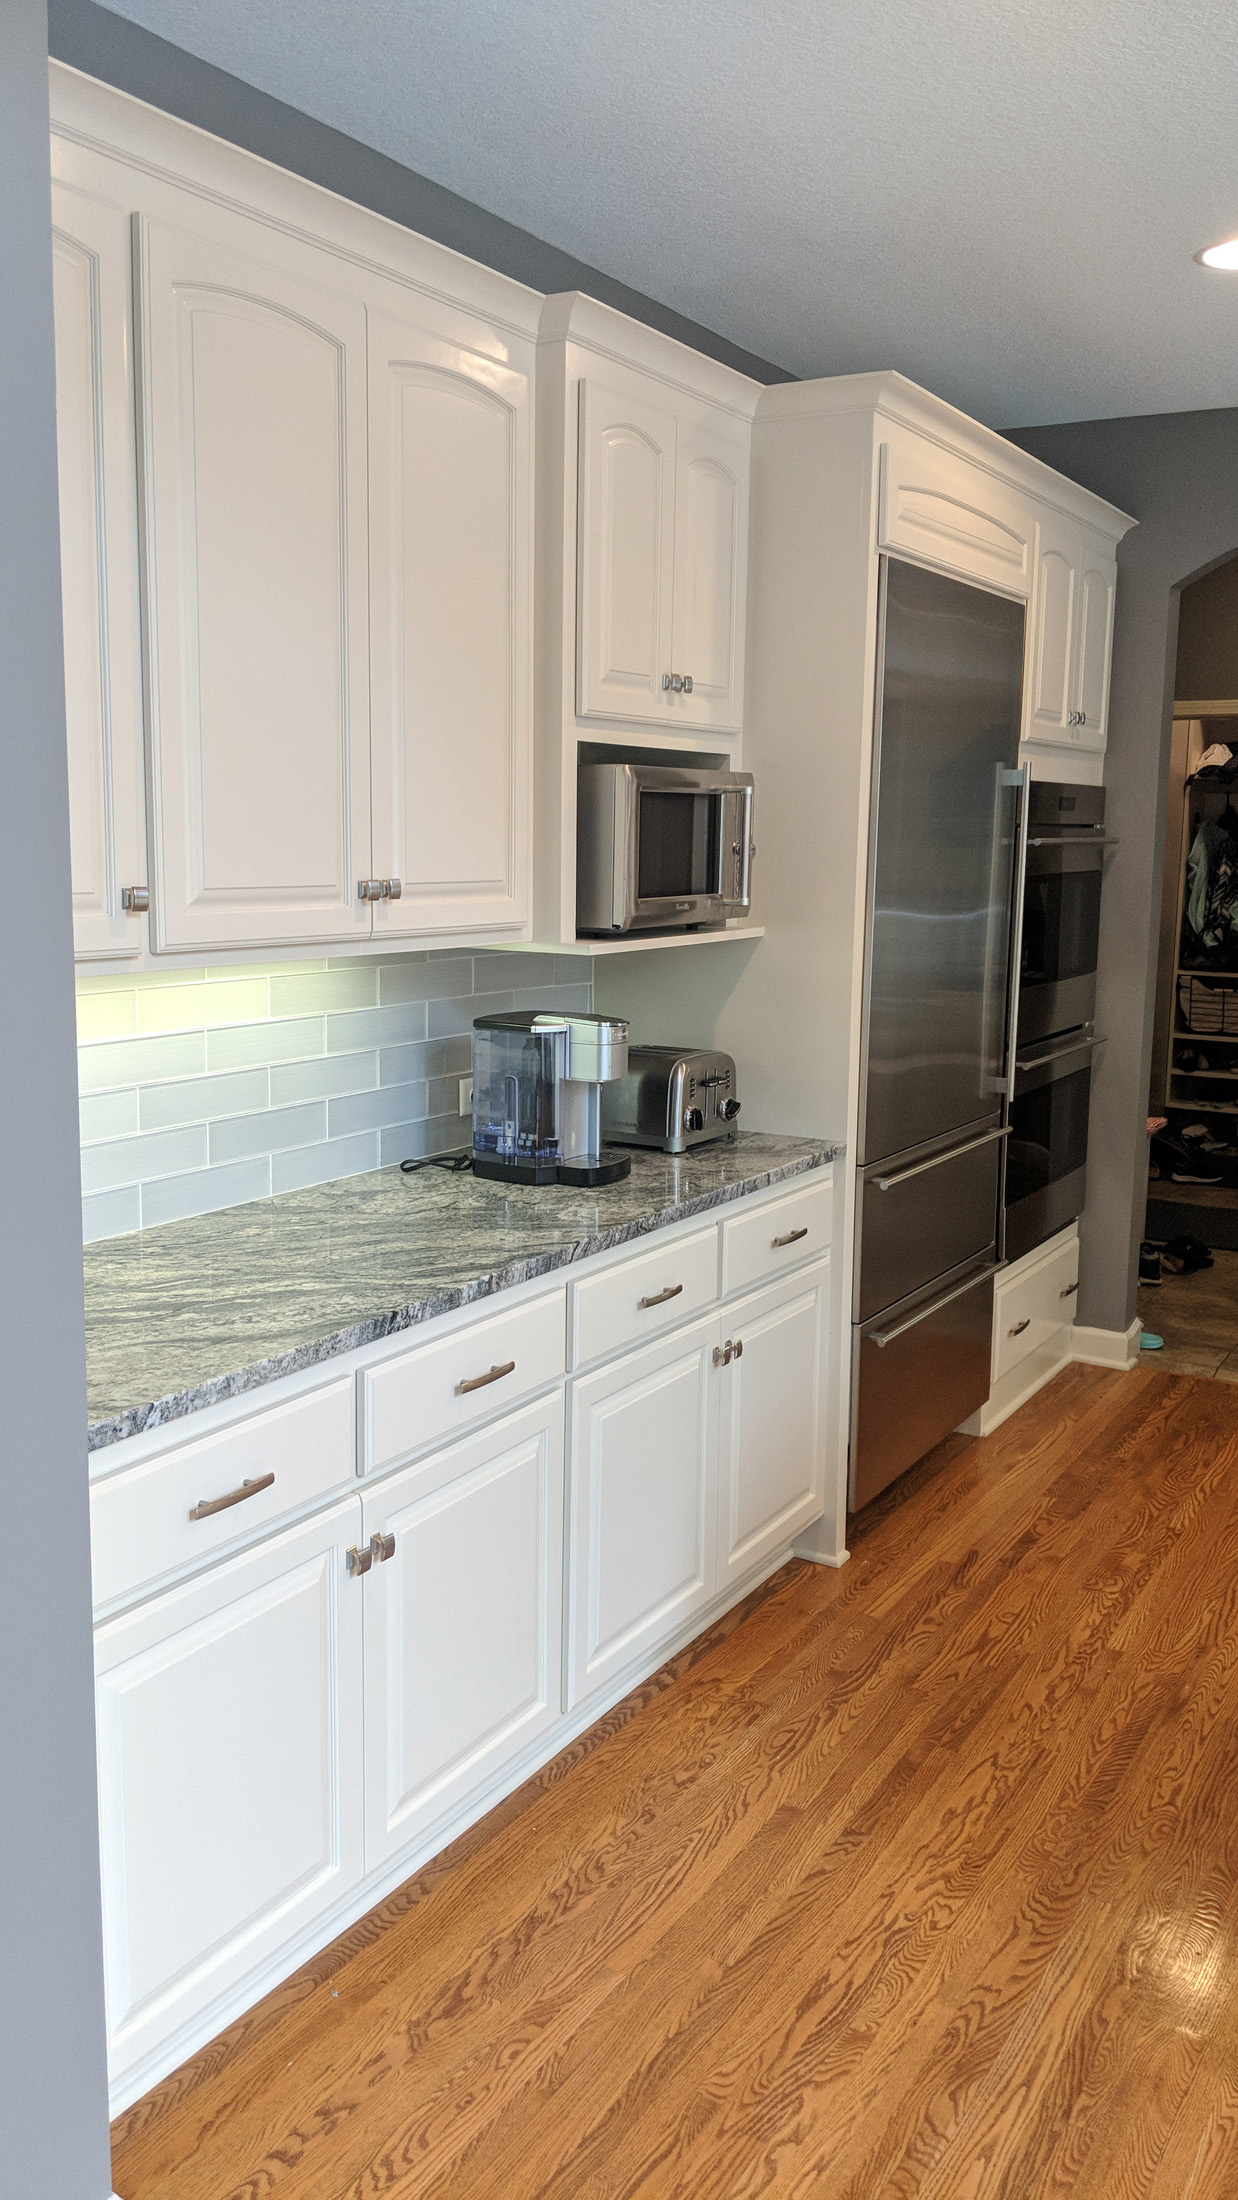 After - New appliances & enameled cabinets